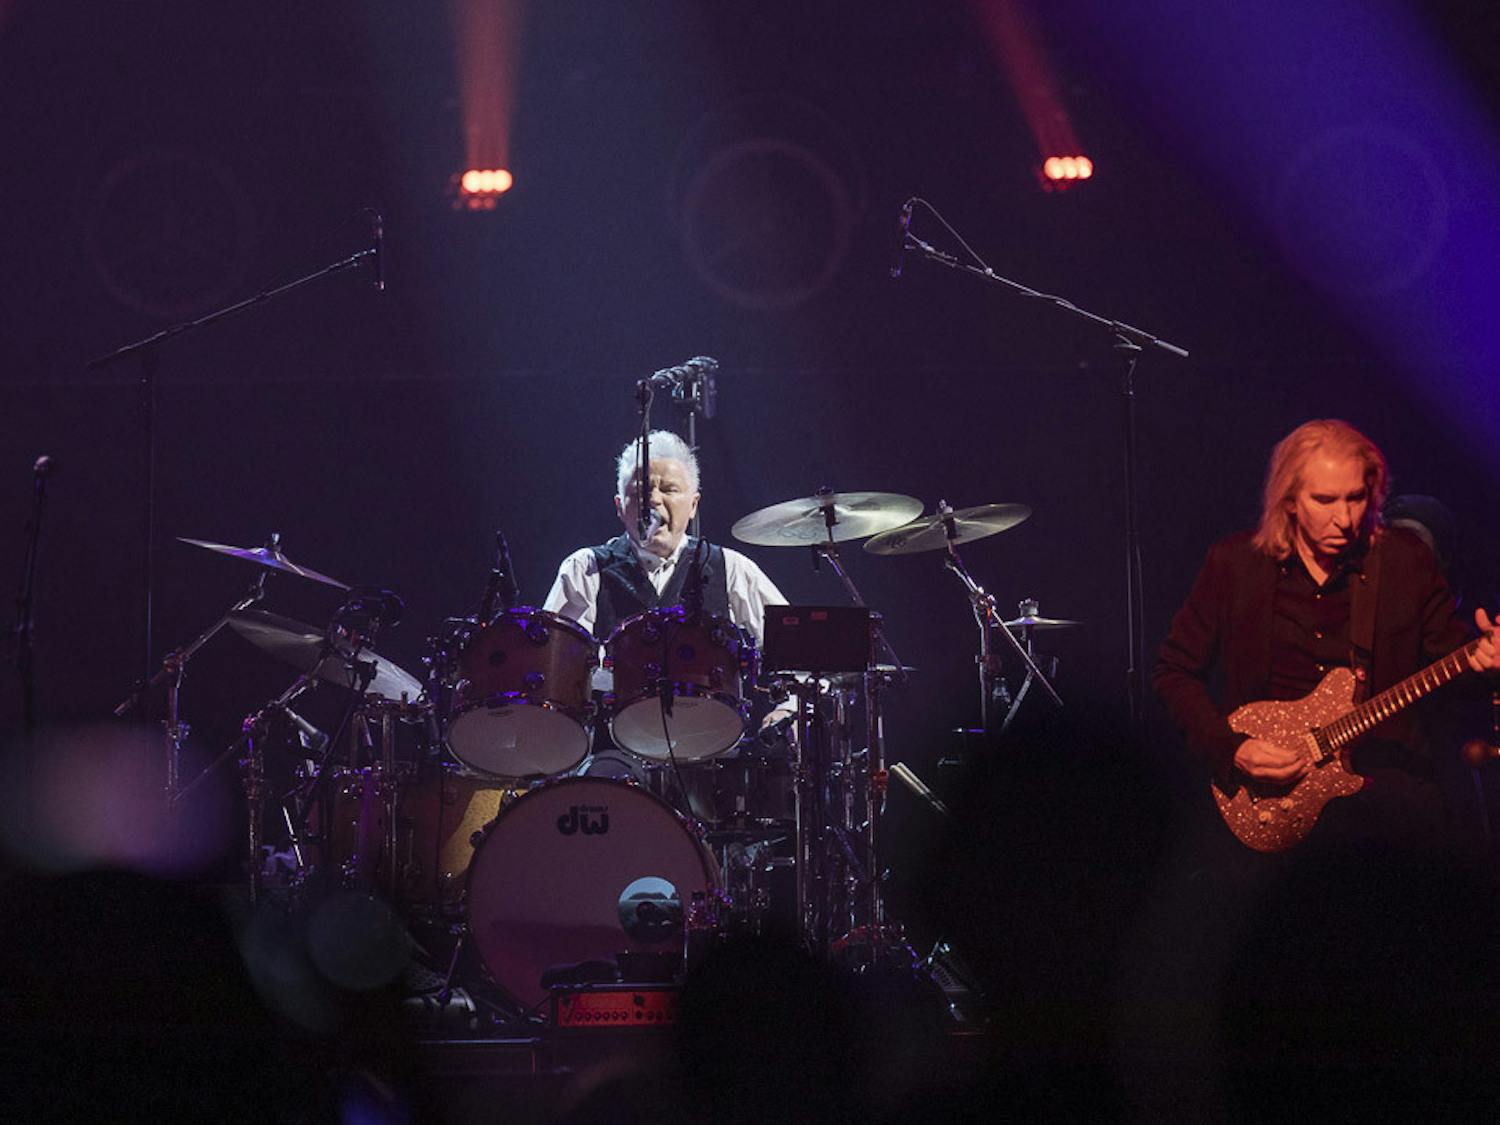 Don Henley, the last original member of the Eagles, plays the drums during the band's "Hotel California" Tour at Colonial Life Arena on March 30, 2023. This is the band's first performance in South Carolina since it came to Greenville in 2022.&nbsp;